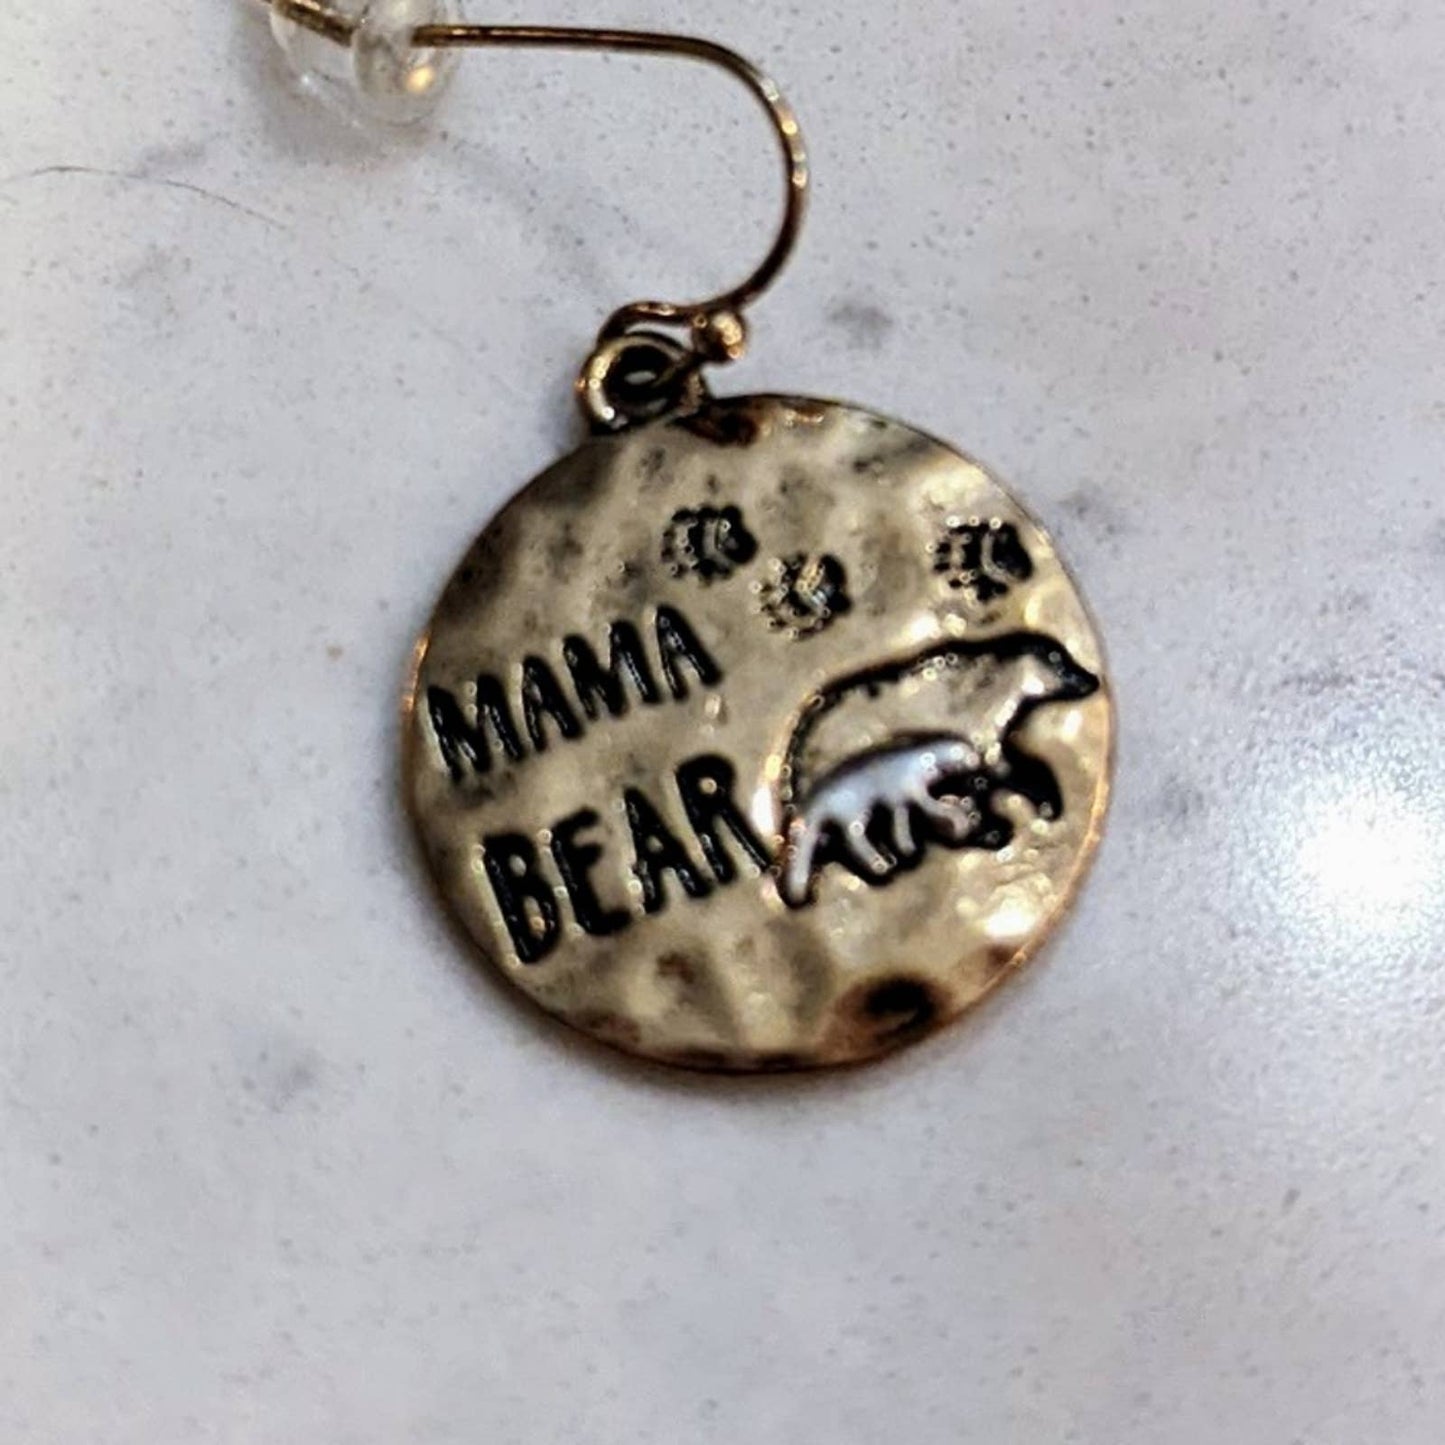 Mama Bear Bronze Silver Two-Tone Hammered Metal Disk Earrings